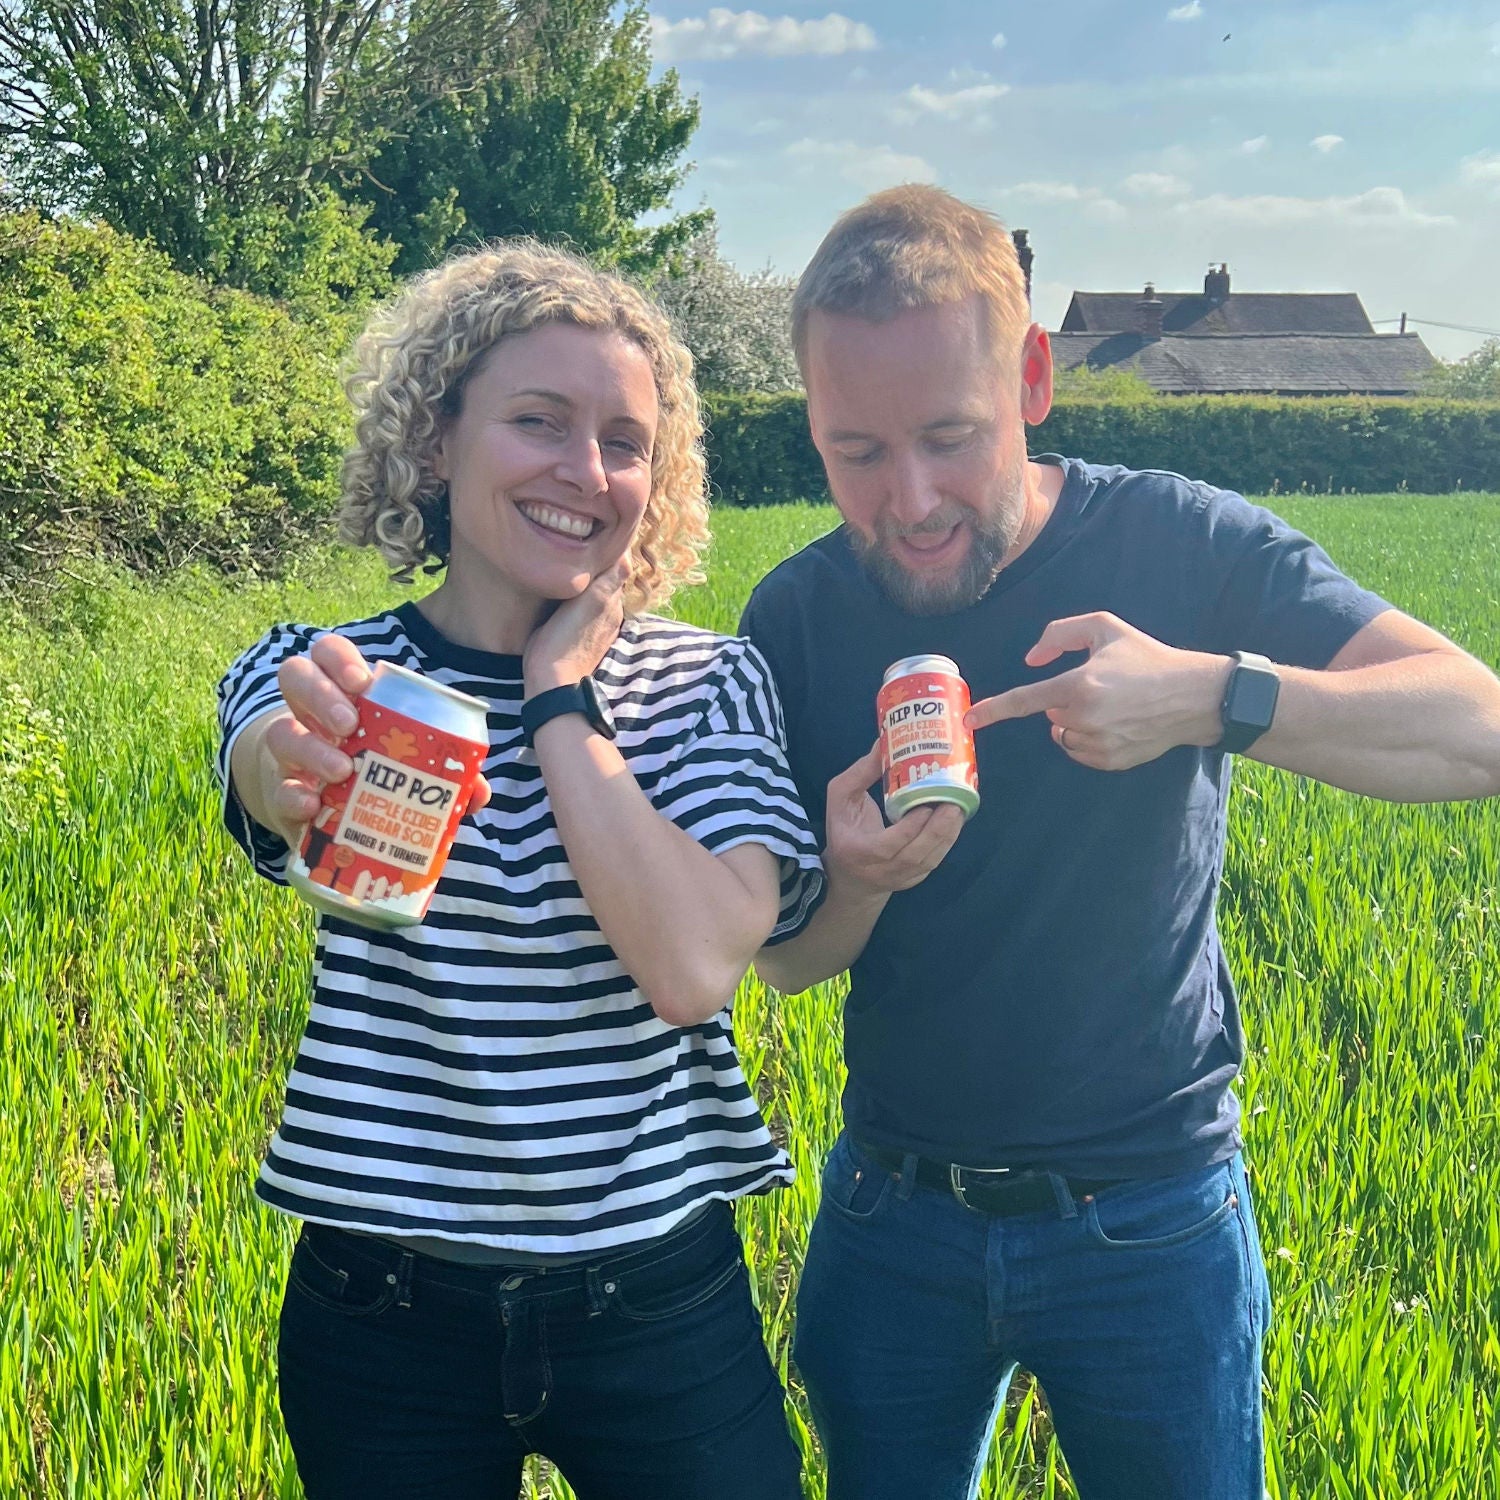 Our founders, Emma and Kenny standing in a field holding some Hip Pop living soda cans